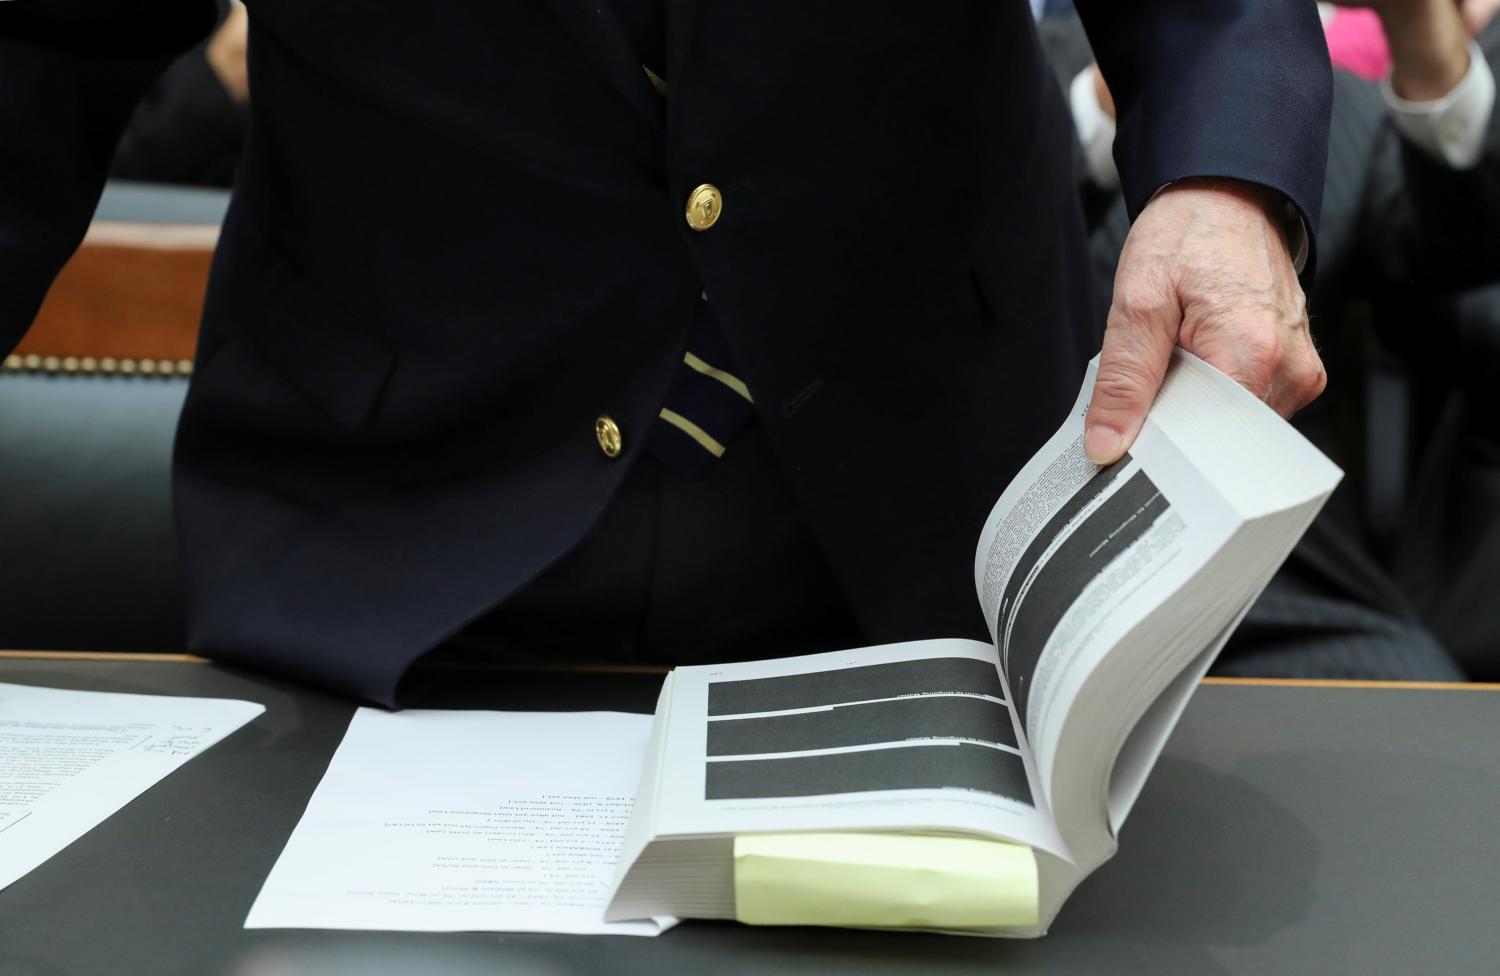 Former White House counsel John Dean, a key figure in the Watergate scandal that toppled former President Richard Nixon, opens the report from Special Counsel Robert Mueller to a heavily redacted page as he prepares to testify before a House Judiciary Committee hearing entitled "Lessons from the Mueller Report" on Capitol Hill in Washington U.S., June 10, 2019.  REUTERS/Jonathan Ernst